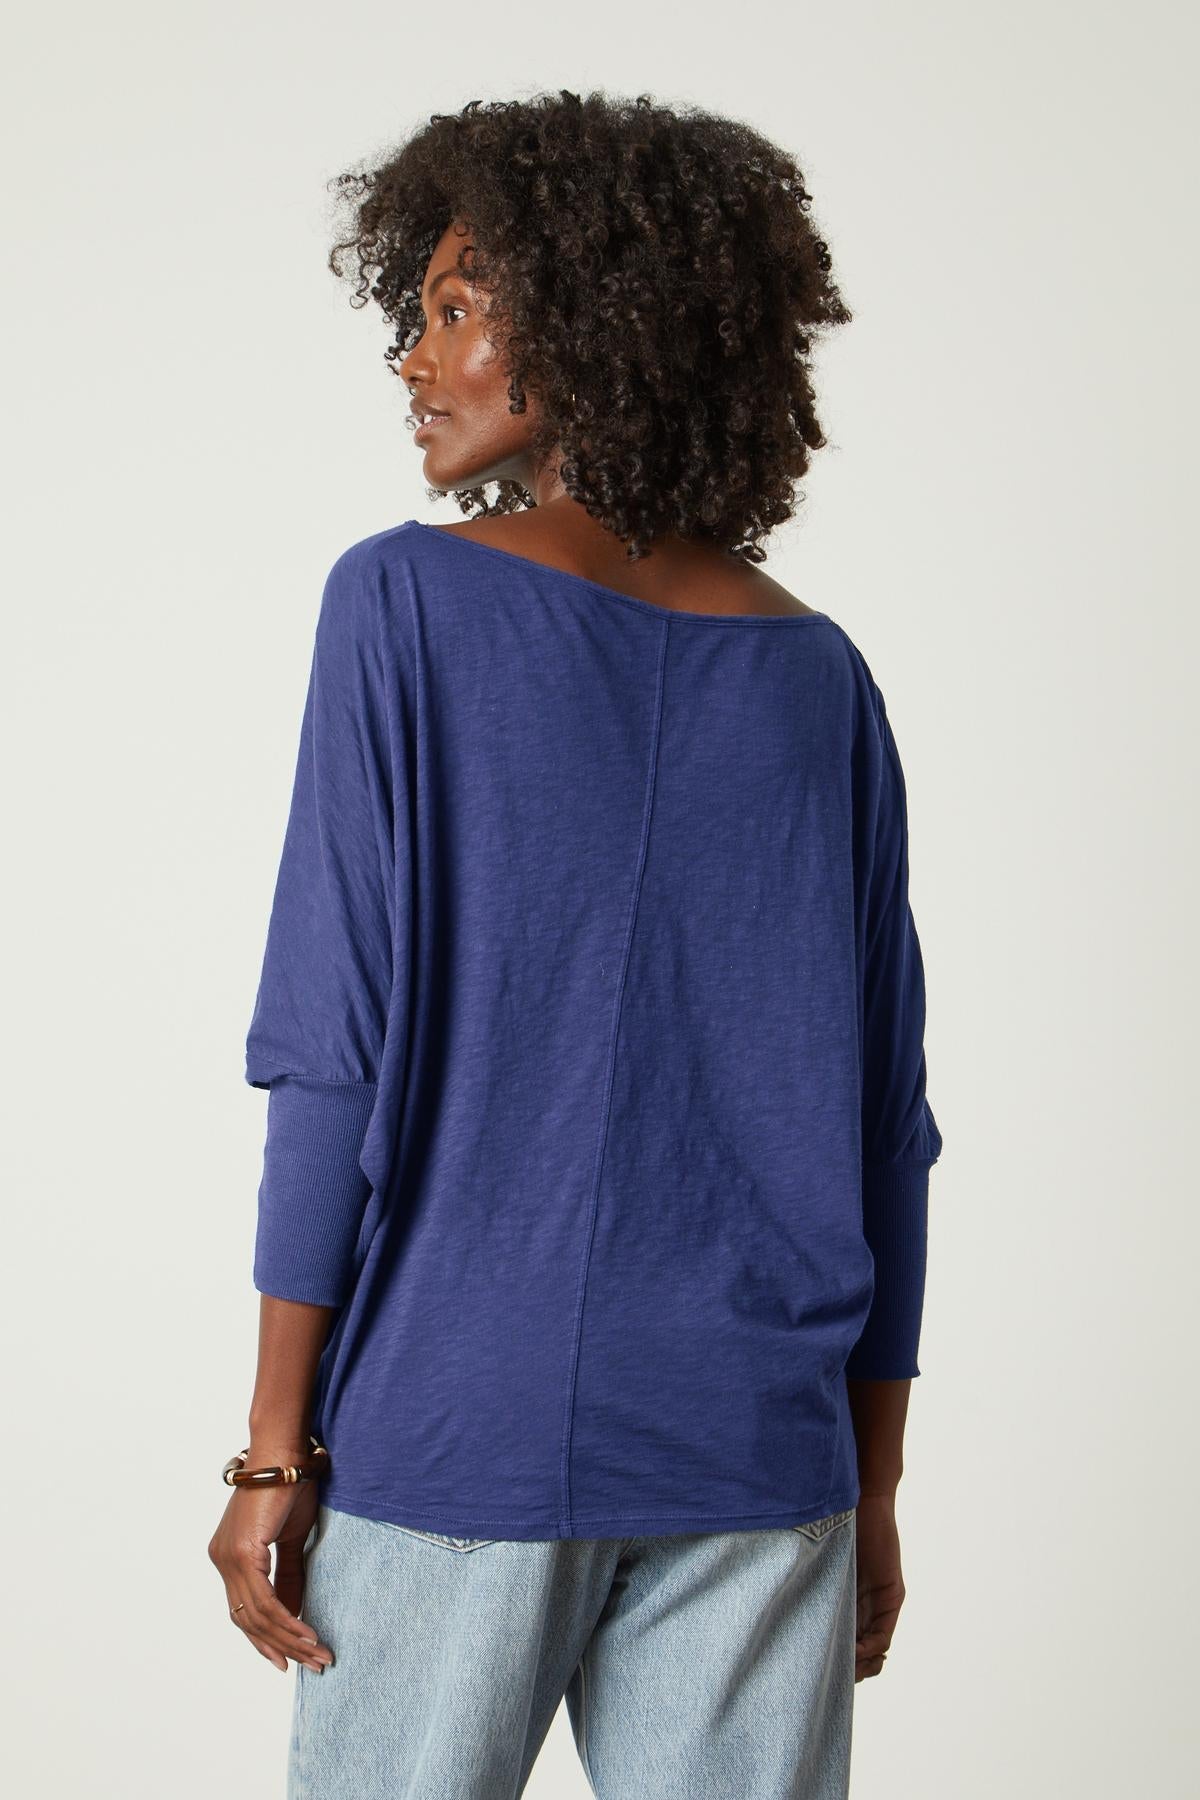 The back view of a woman wearing Velvet by Graham & Spencer jeans and a blue top.-35206719176897